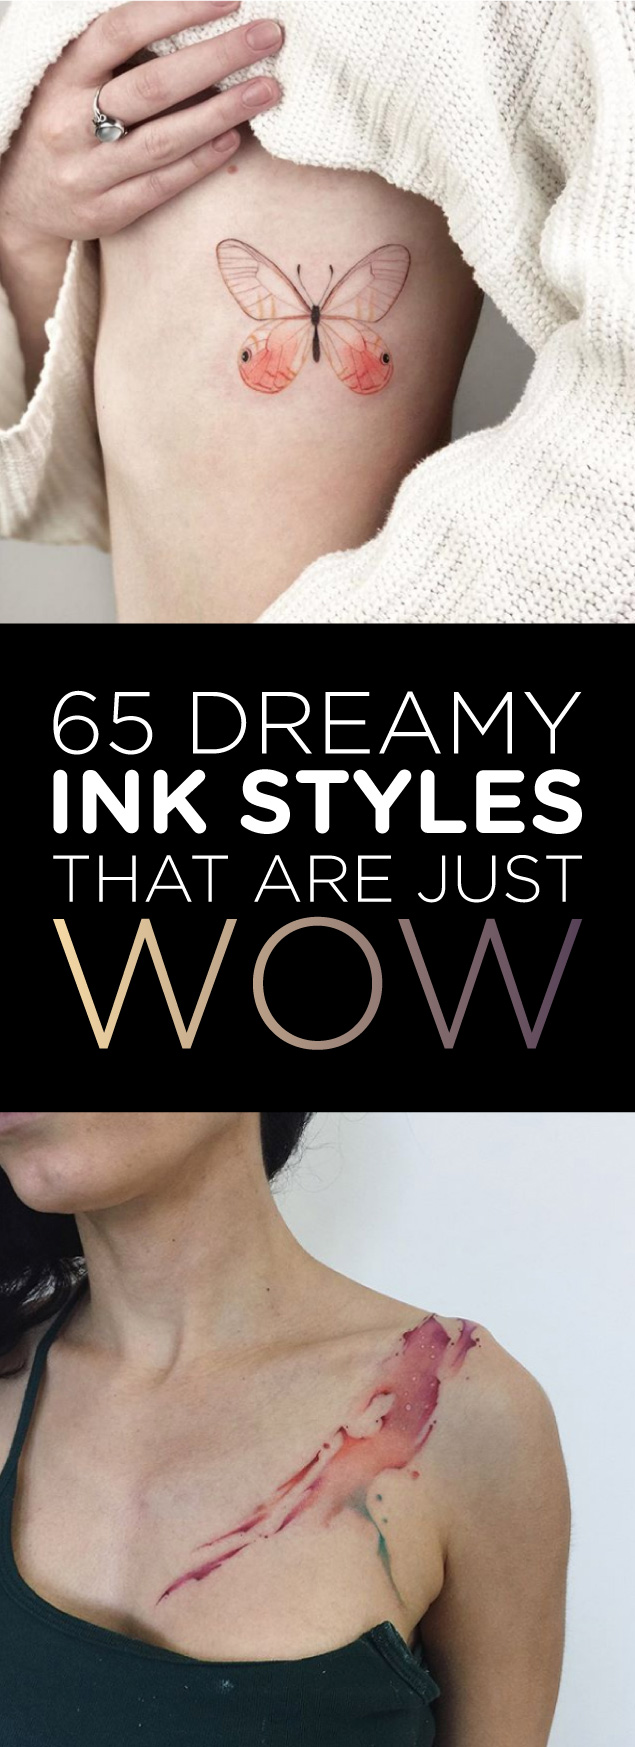 65 Dreamy Ink Styles That Are Just WOW I TattooBlend